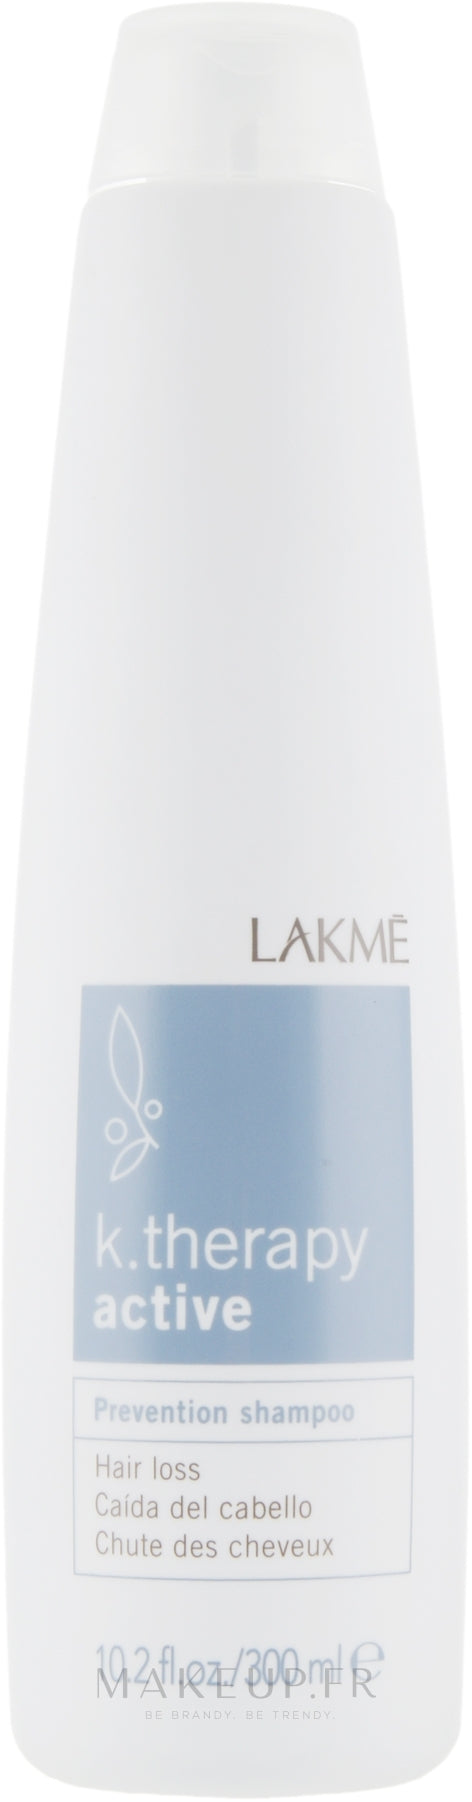 Lakme K. Therapy Active Prevention Shampoo - 300 ml